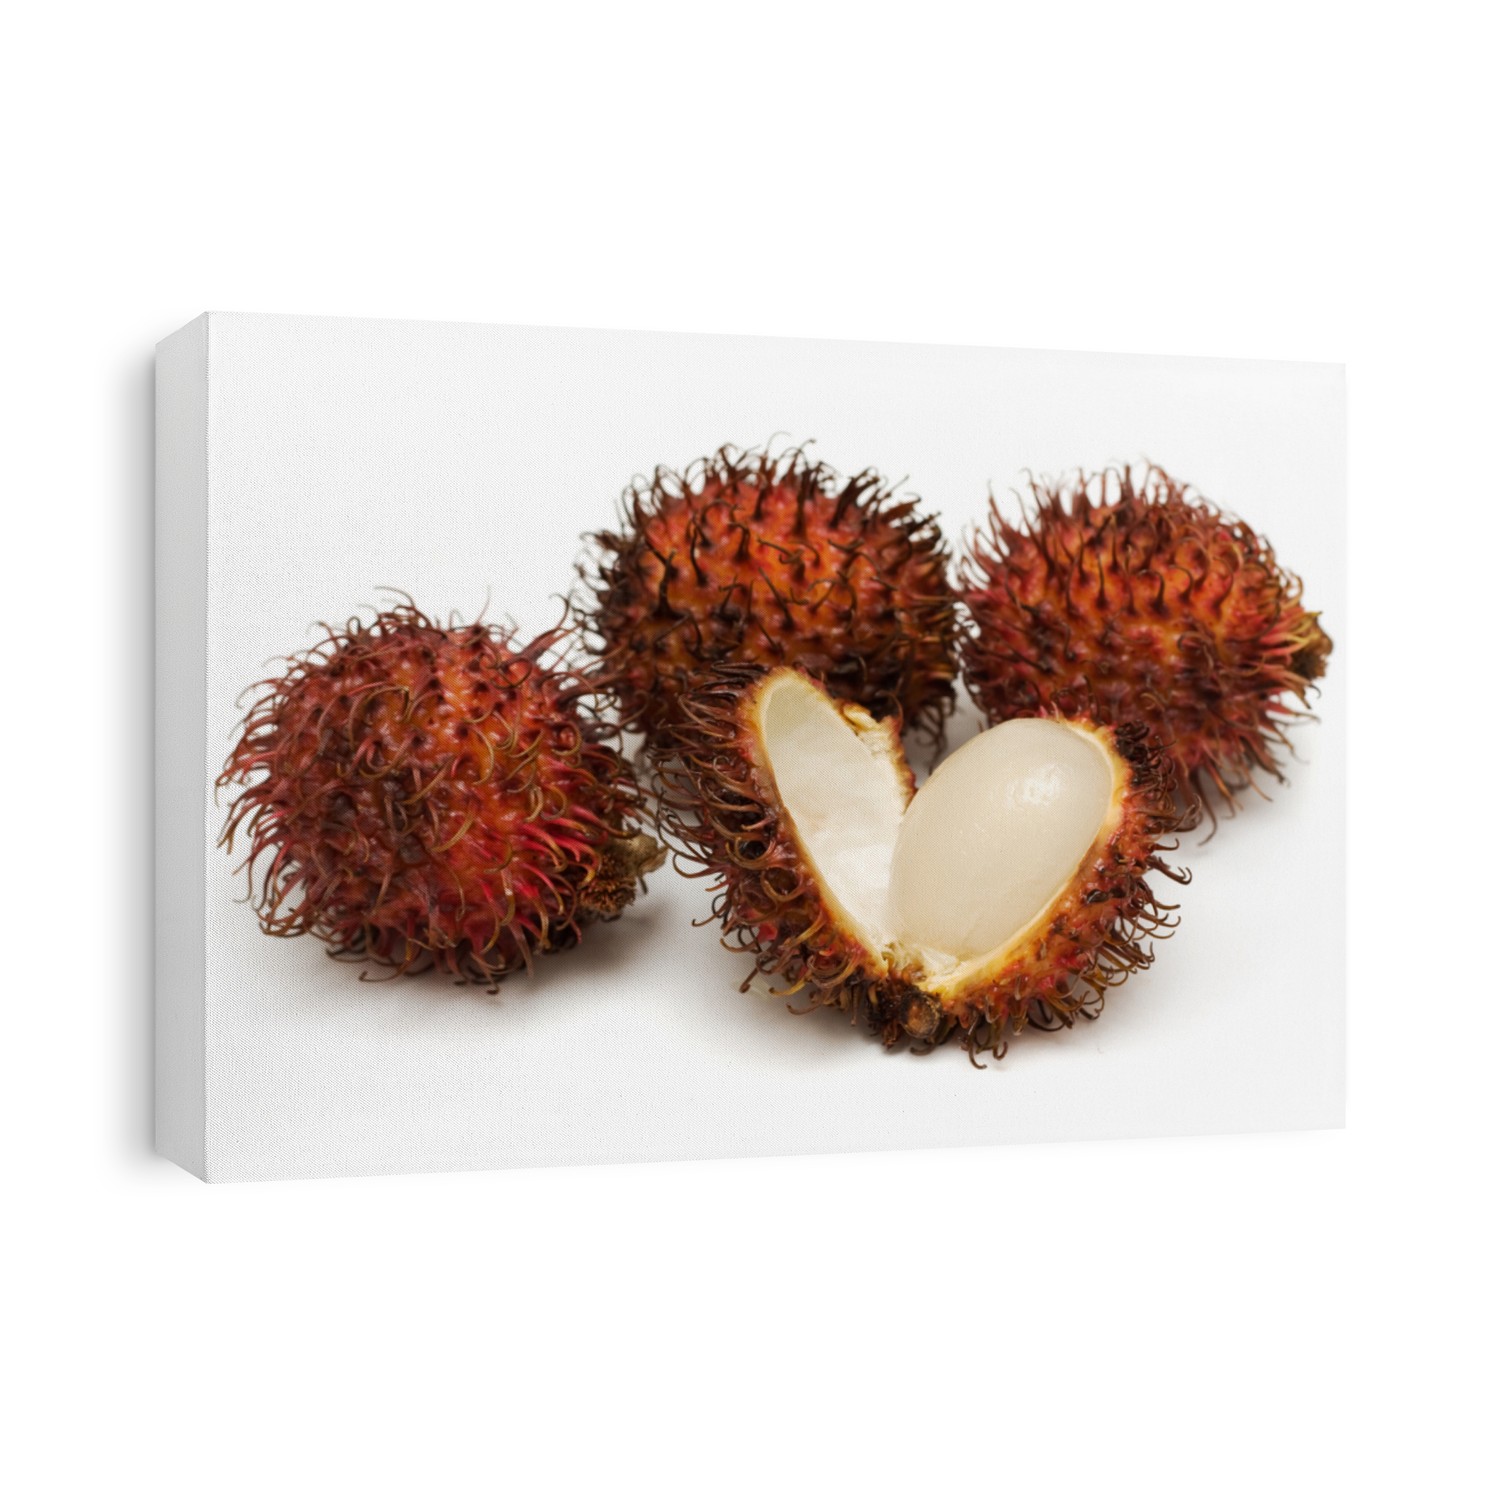 Rambutan. Image series of fresh vegetables and fruits on white background